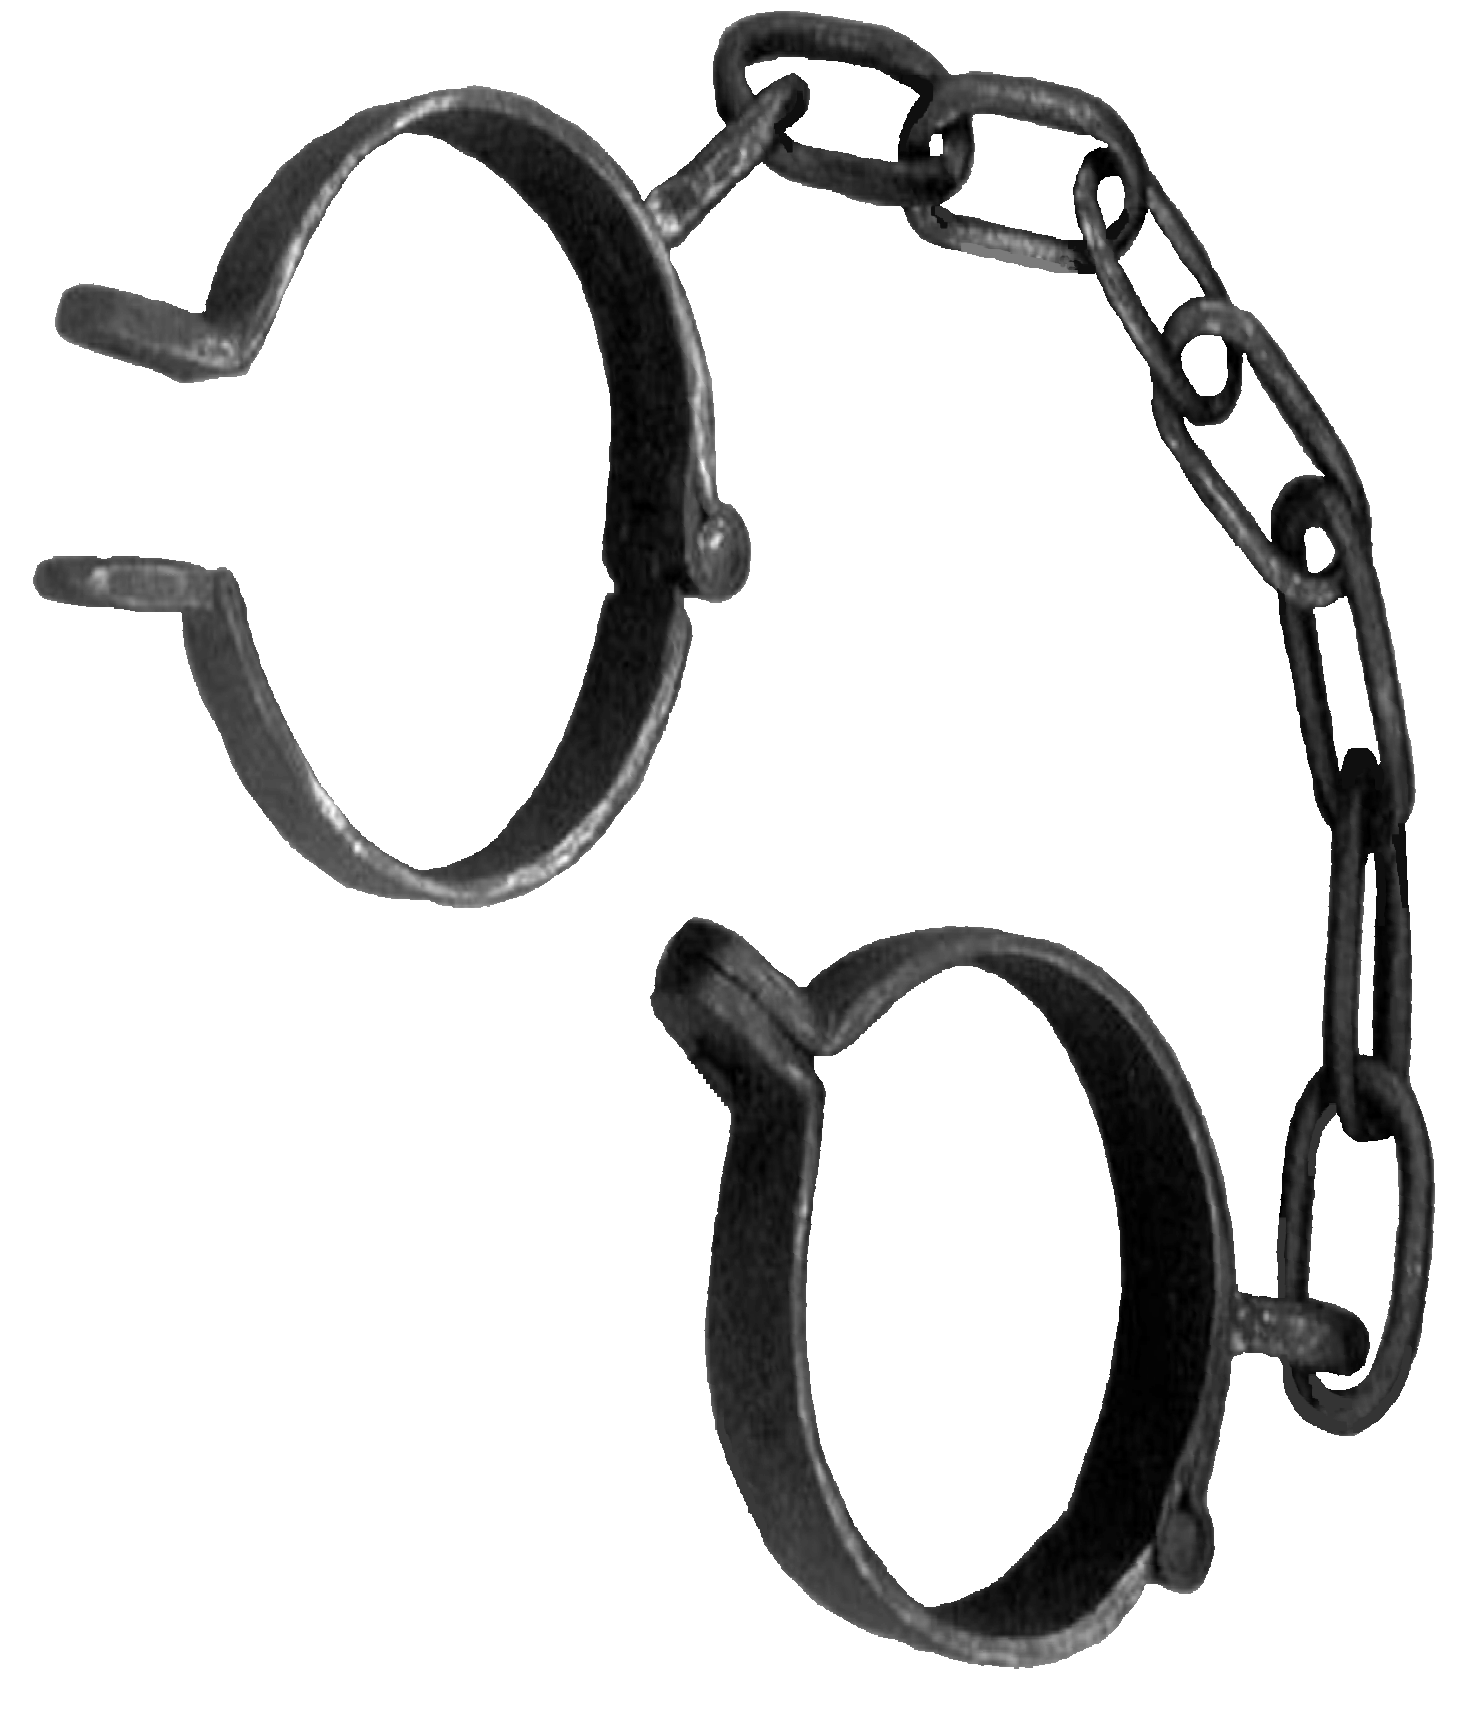 Page title . Handcuffs clipart shackles